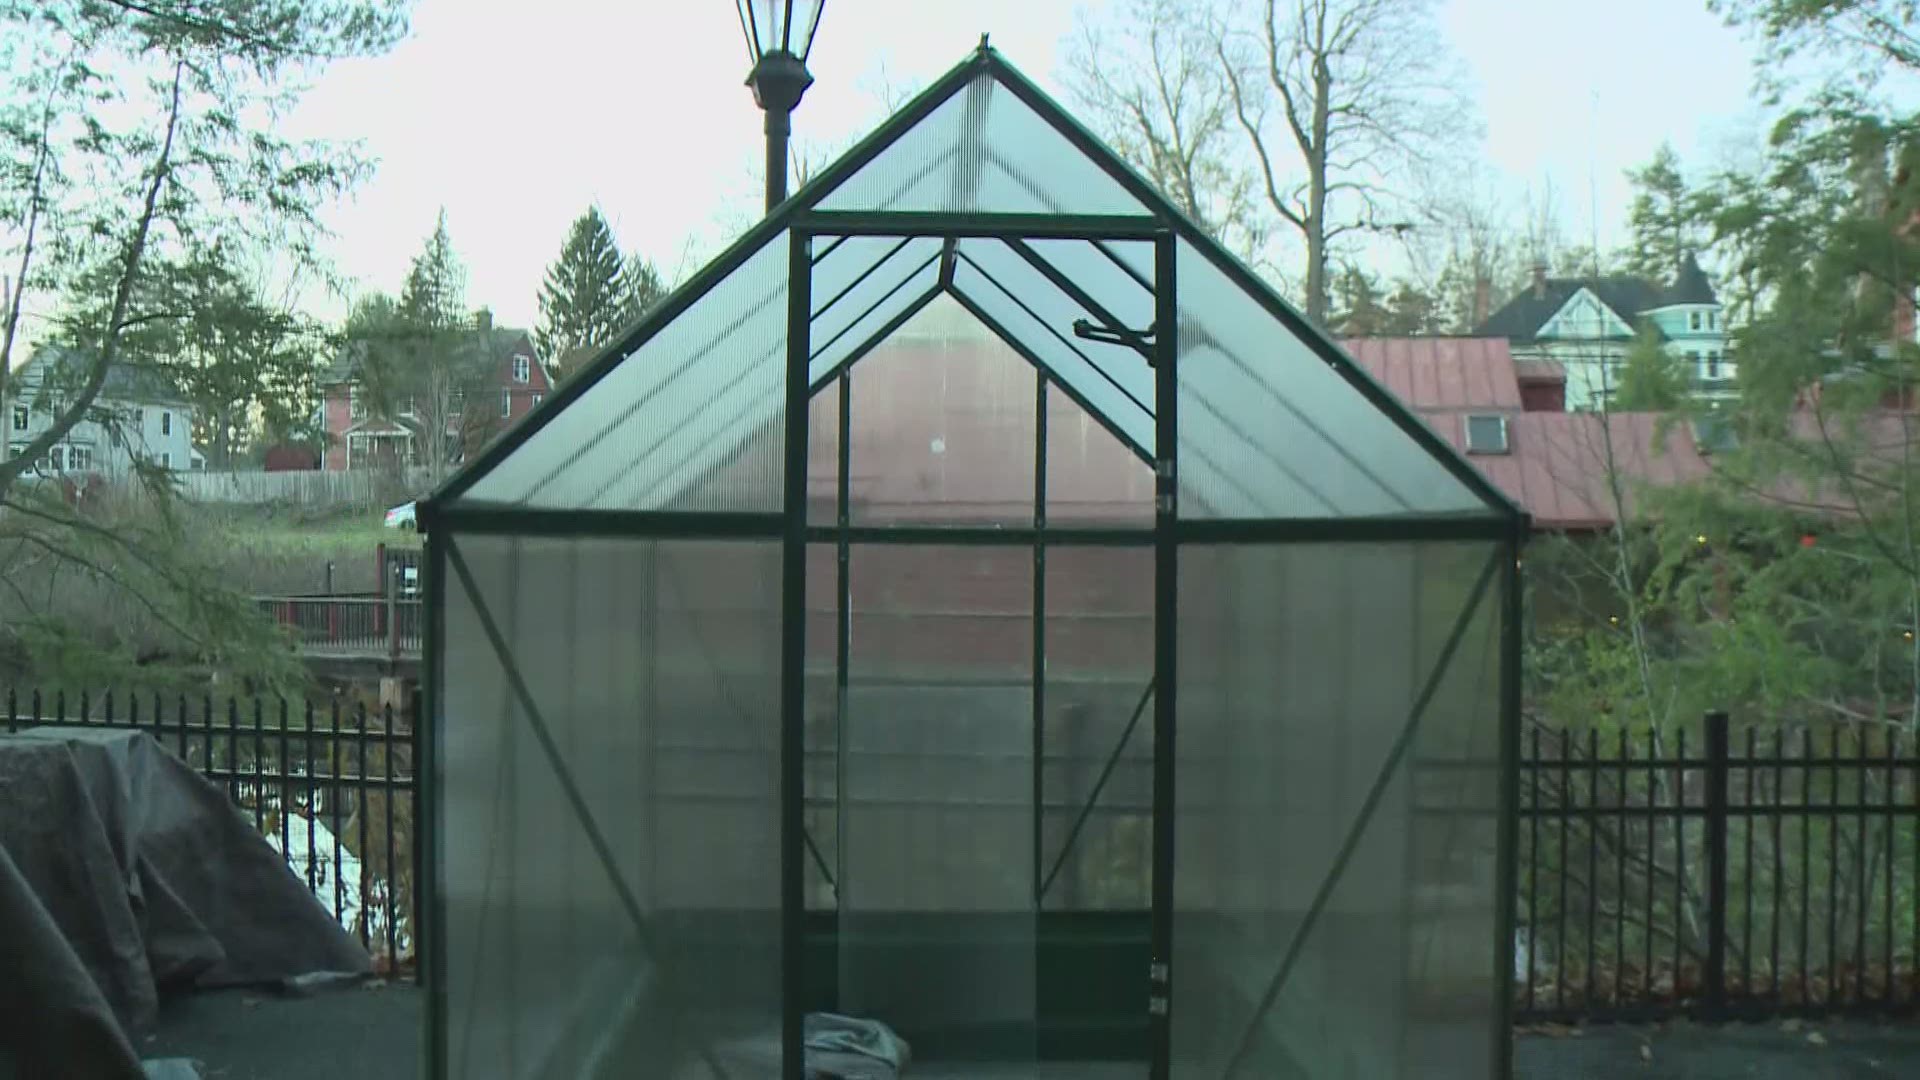 One restaurant has set up "greenhouses" for patrons to eat outside.